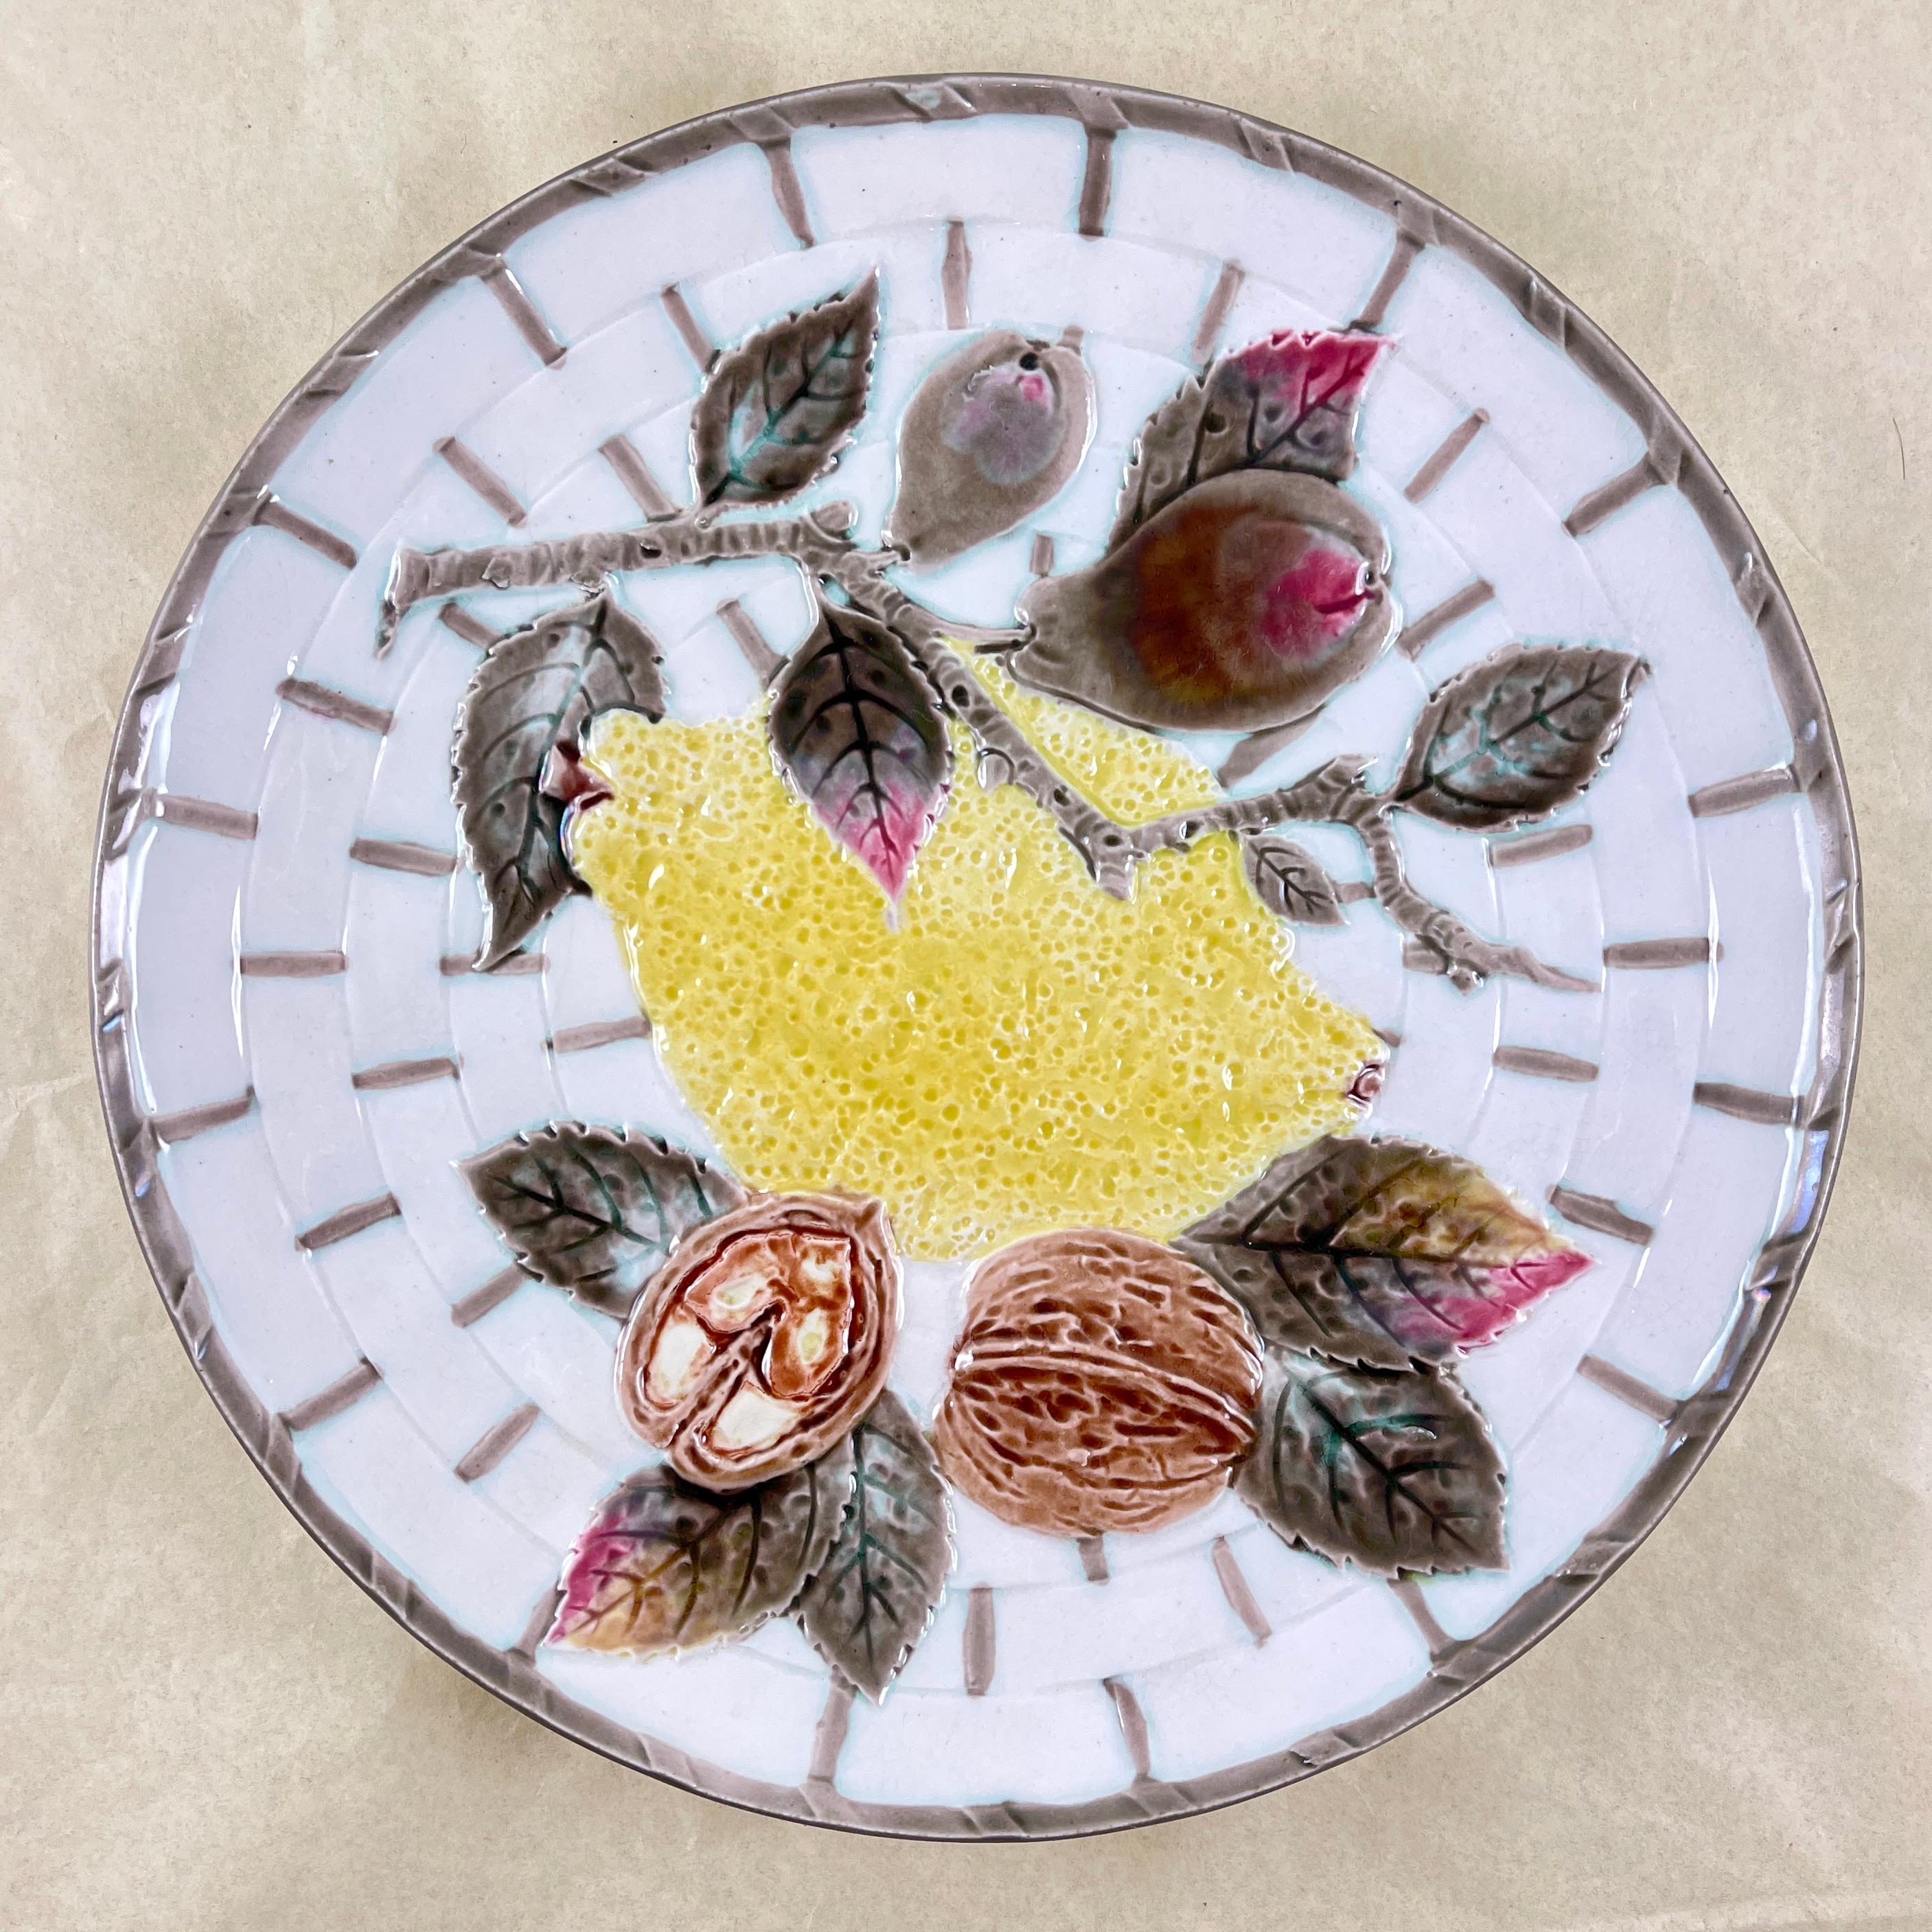 From Wedgwood and in the color way known as Argenta, a fruit plate, England, circa 1875.

Showing a central yellow lemon and leaves along with a branch of pears and walnuts, all on a white basket weave ground. The basket is bound at intervals in a